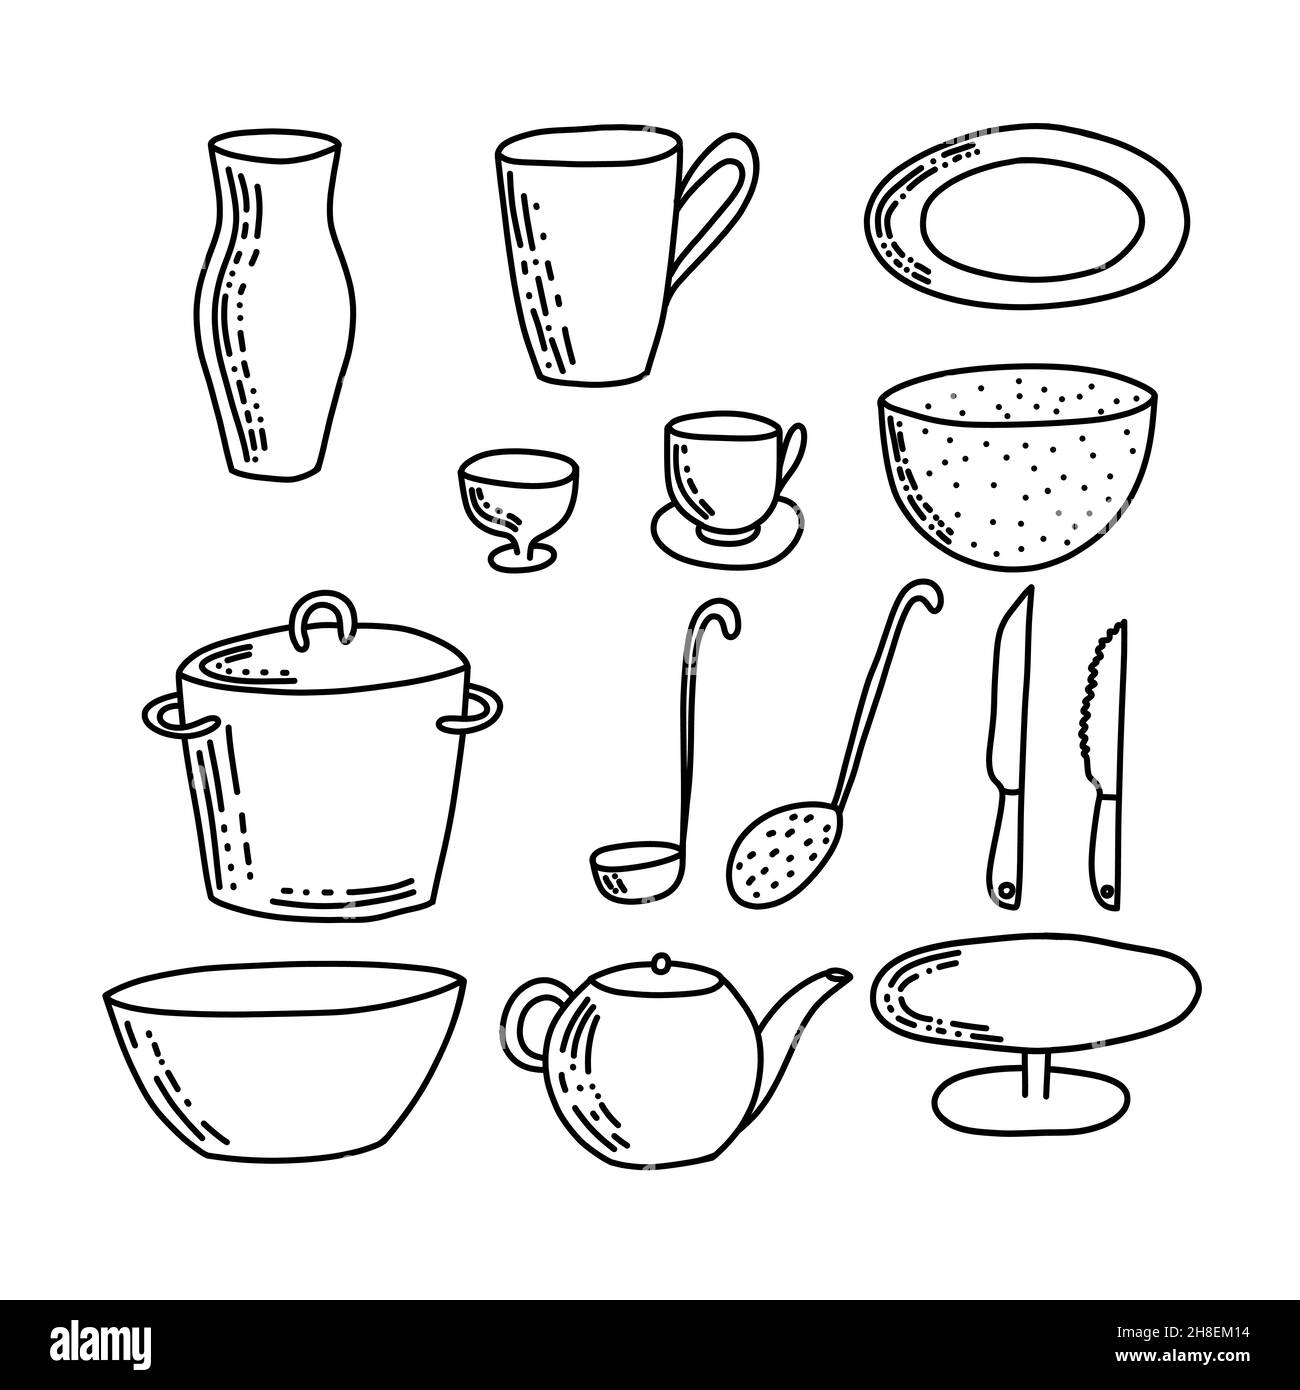 Cute handmade kitchen ware collection. Flat vector illustration. Decorative tableware isolated on white background. Kitchen utensils Stock Vector